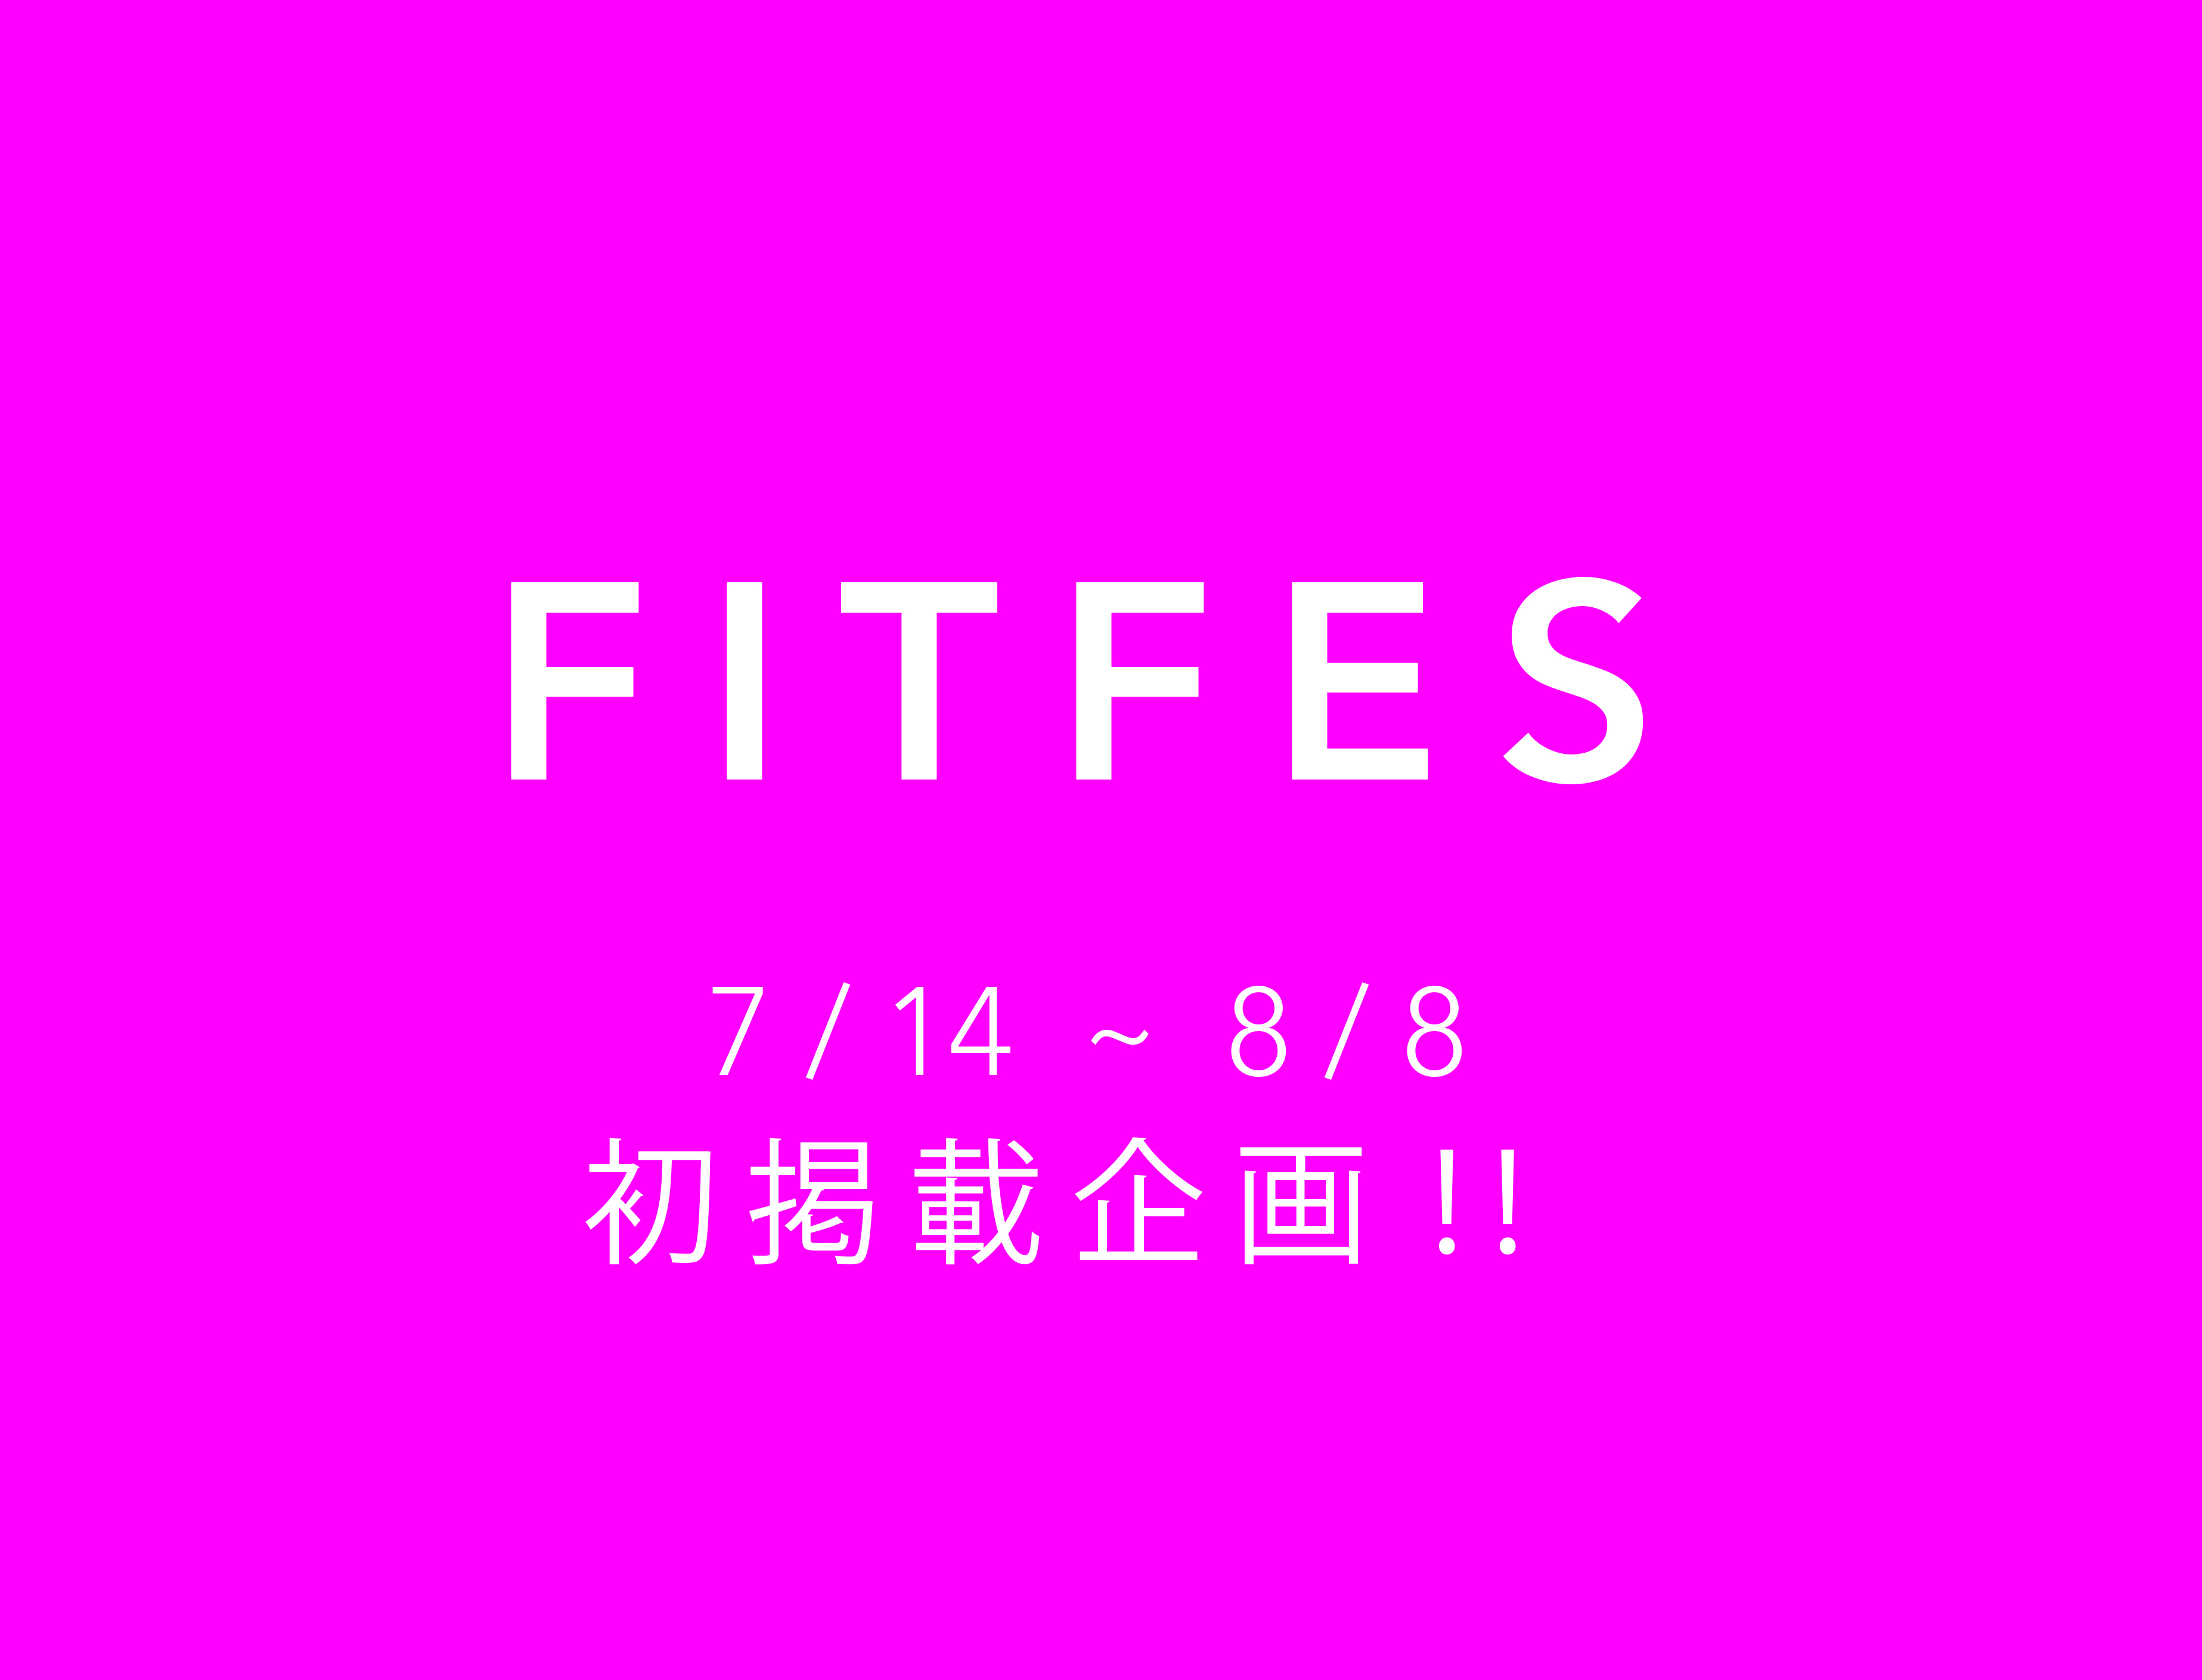 FITFES員の皆様へ！